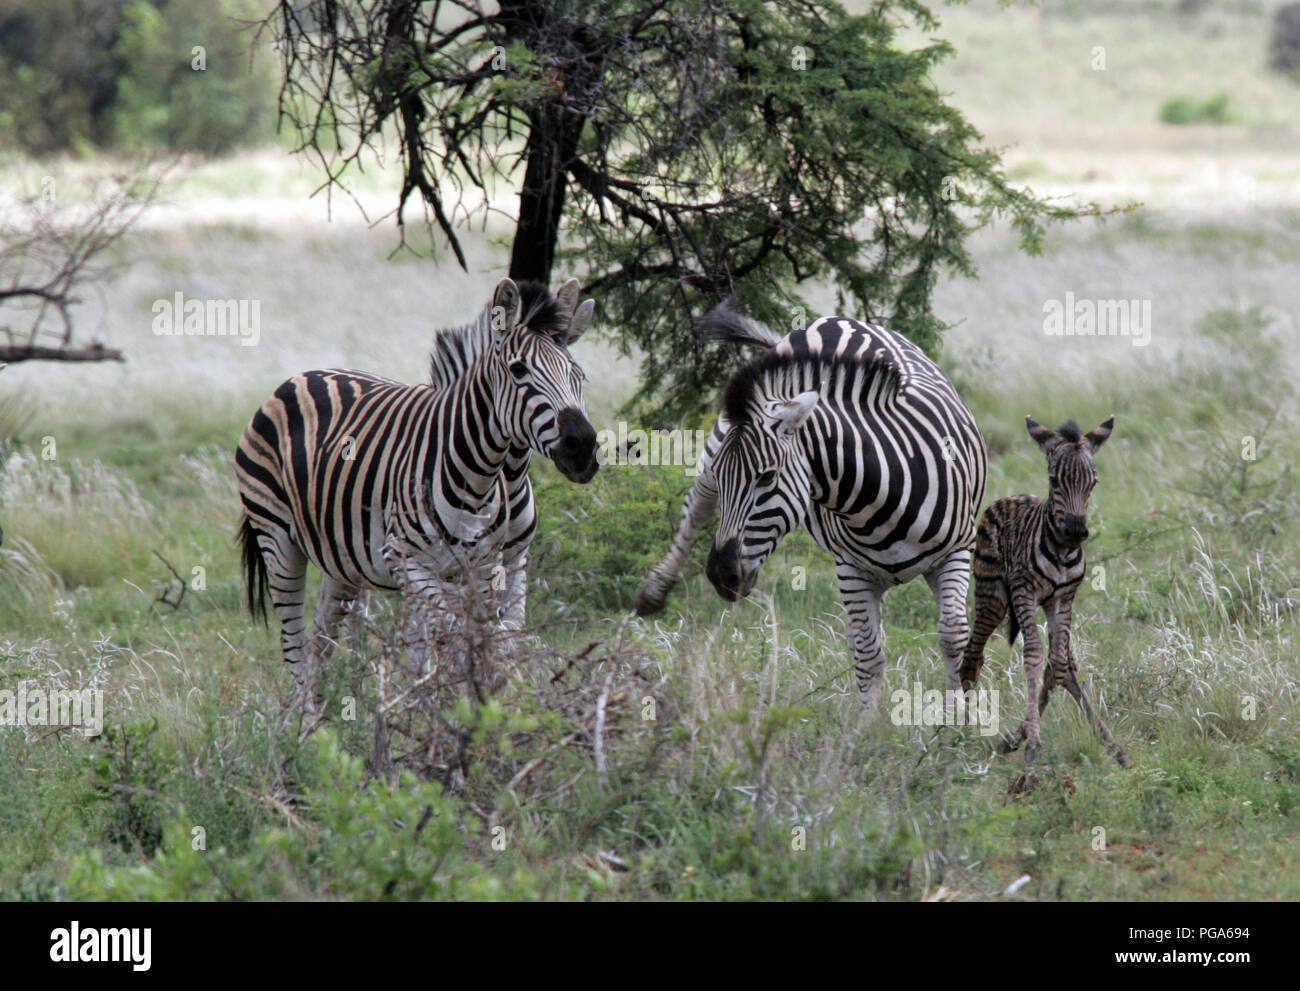 Zebra giving birth and defending new baby. Stock Photo